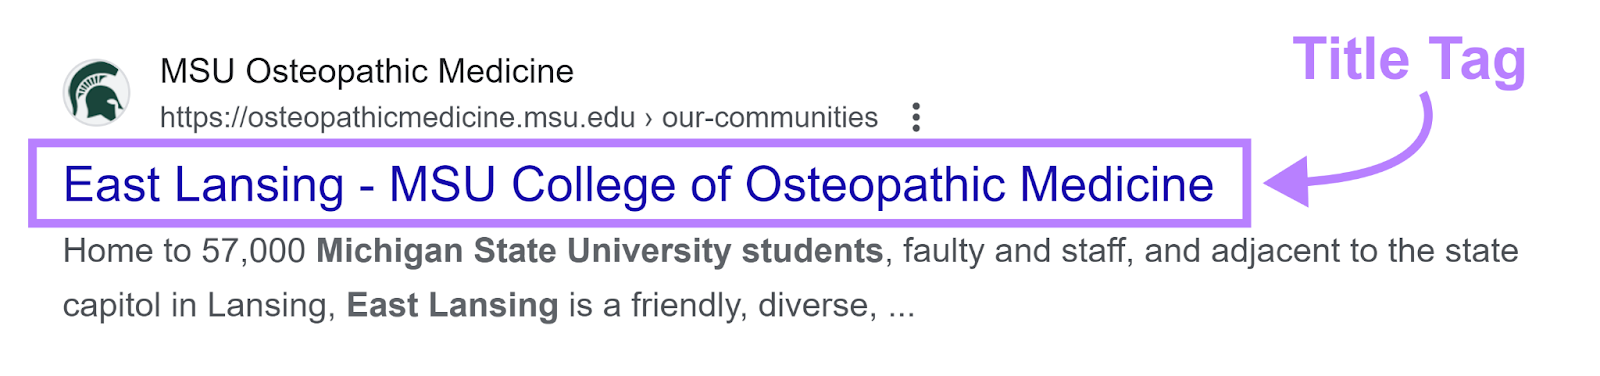 SERP listing for East Lansing MSU Osteopathic Medicine page with annotated Title Tag.